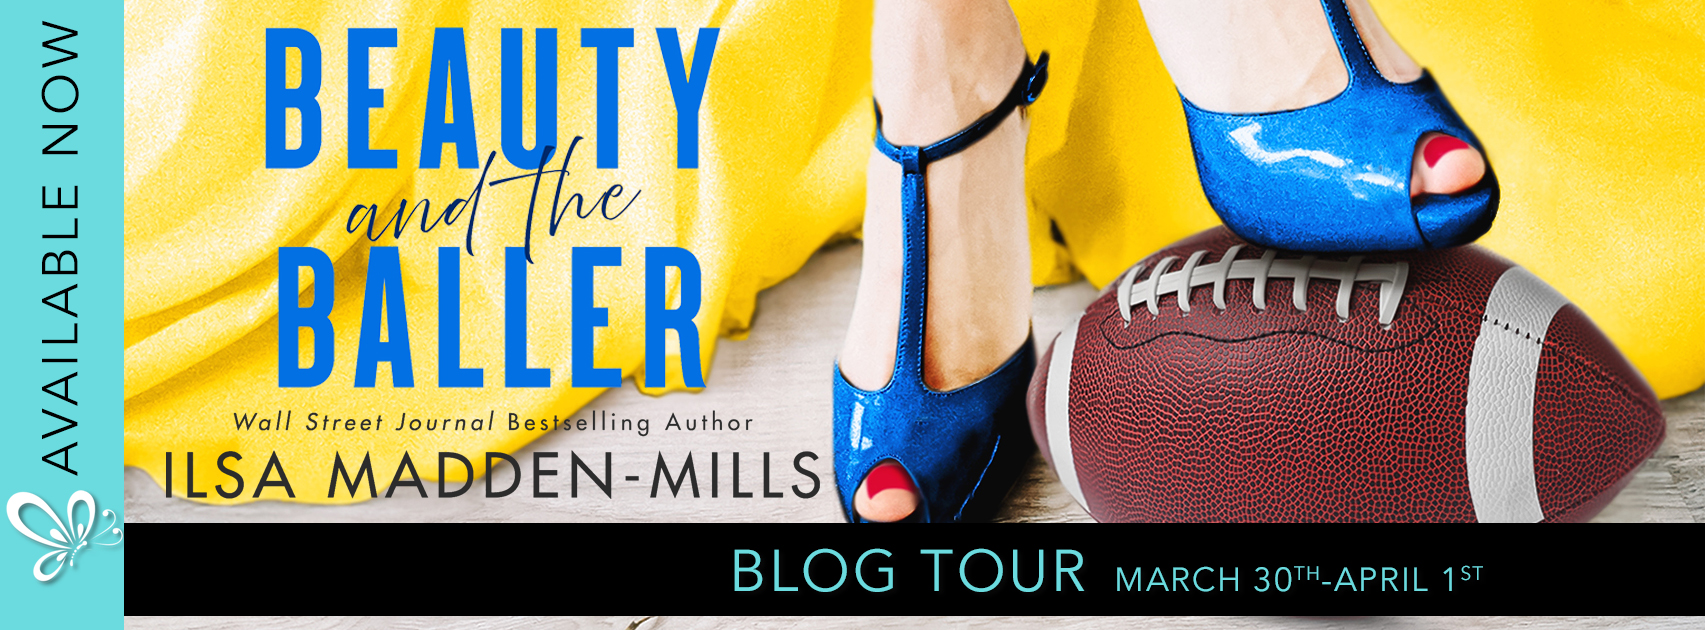 BOOK REVIEW: Beauty and the Baller by Ilsa Madden-Mills